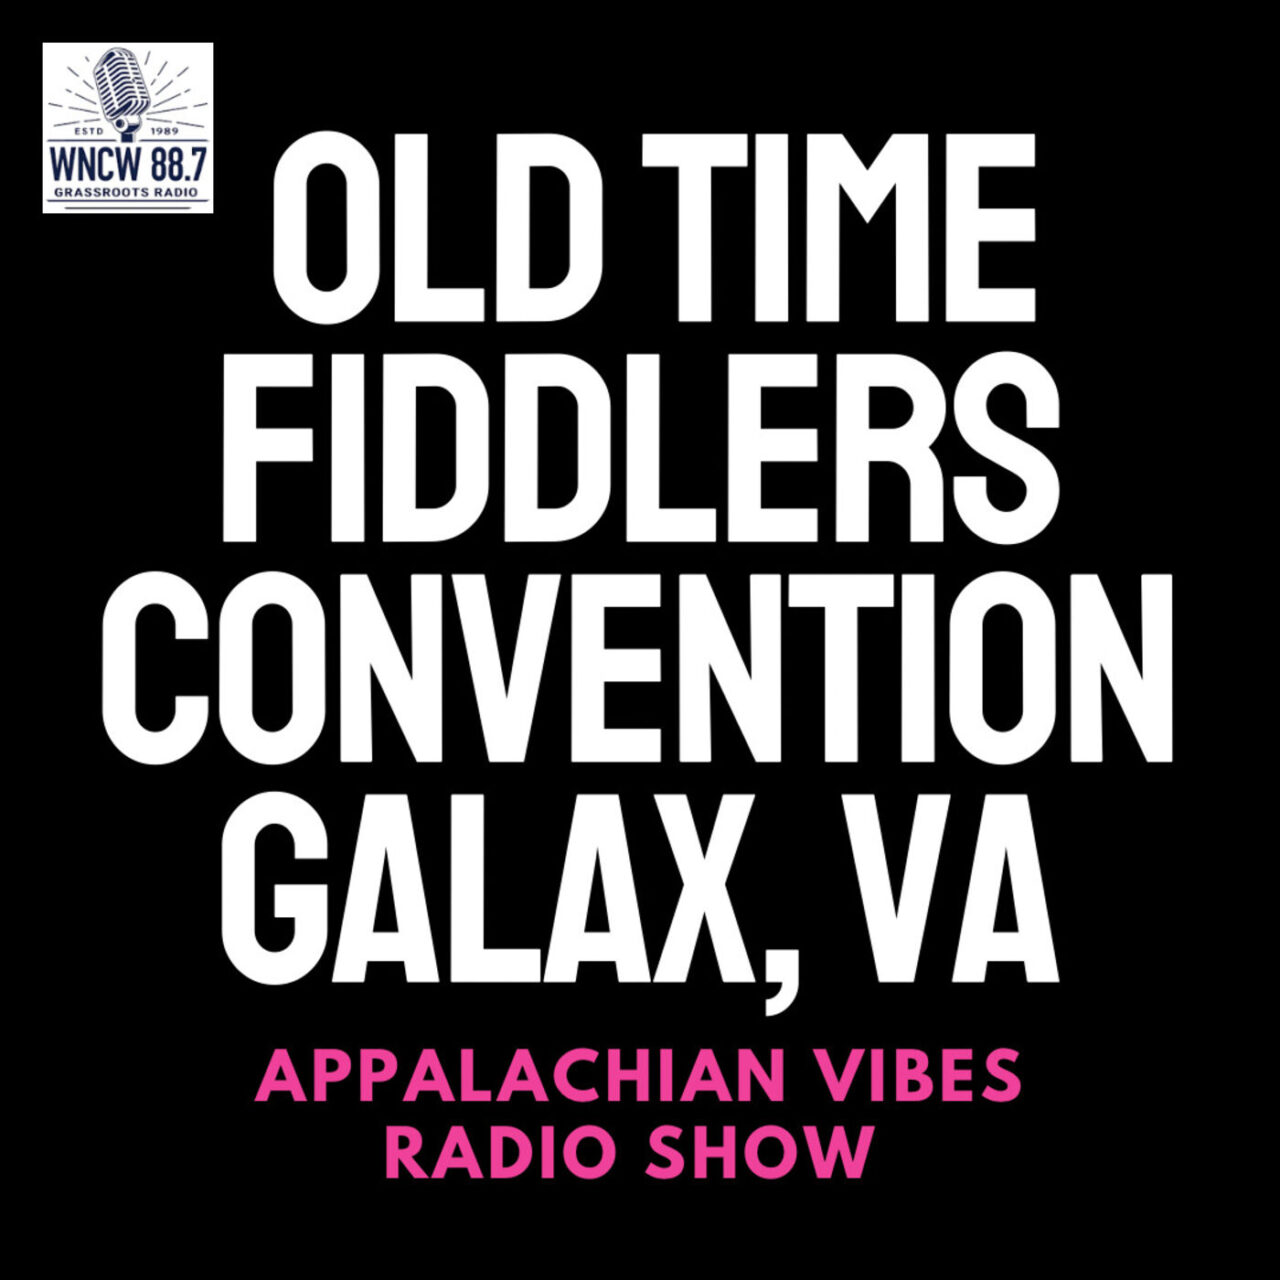 87th Old Time Fiddlers Convention, Galax, VA Appalachian Vibes